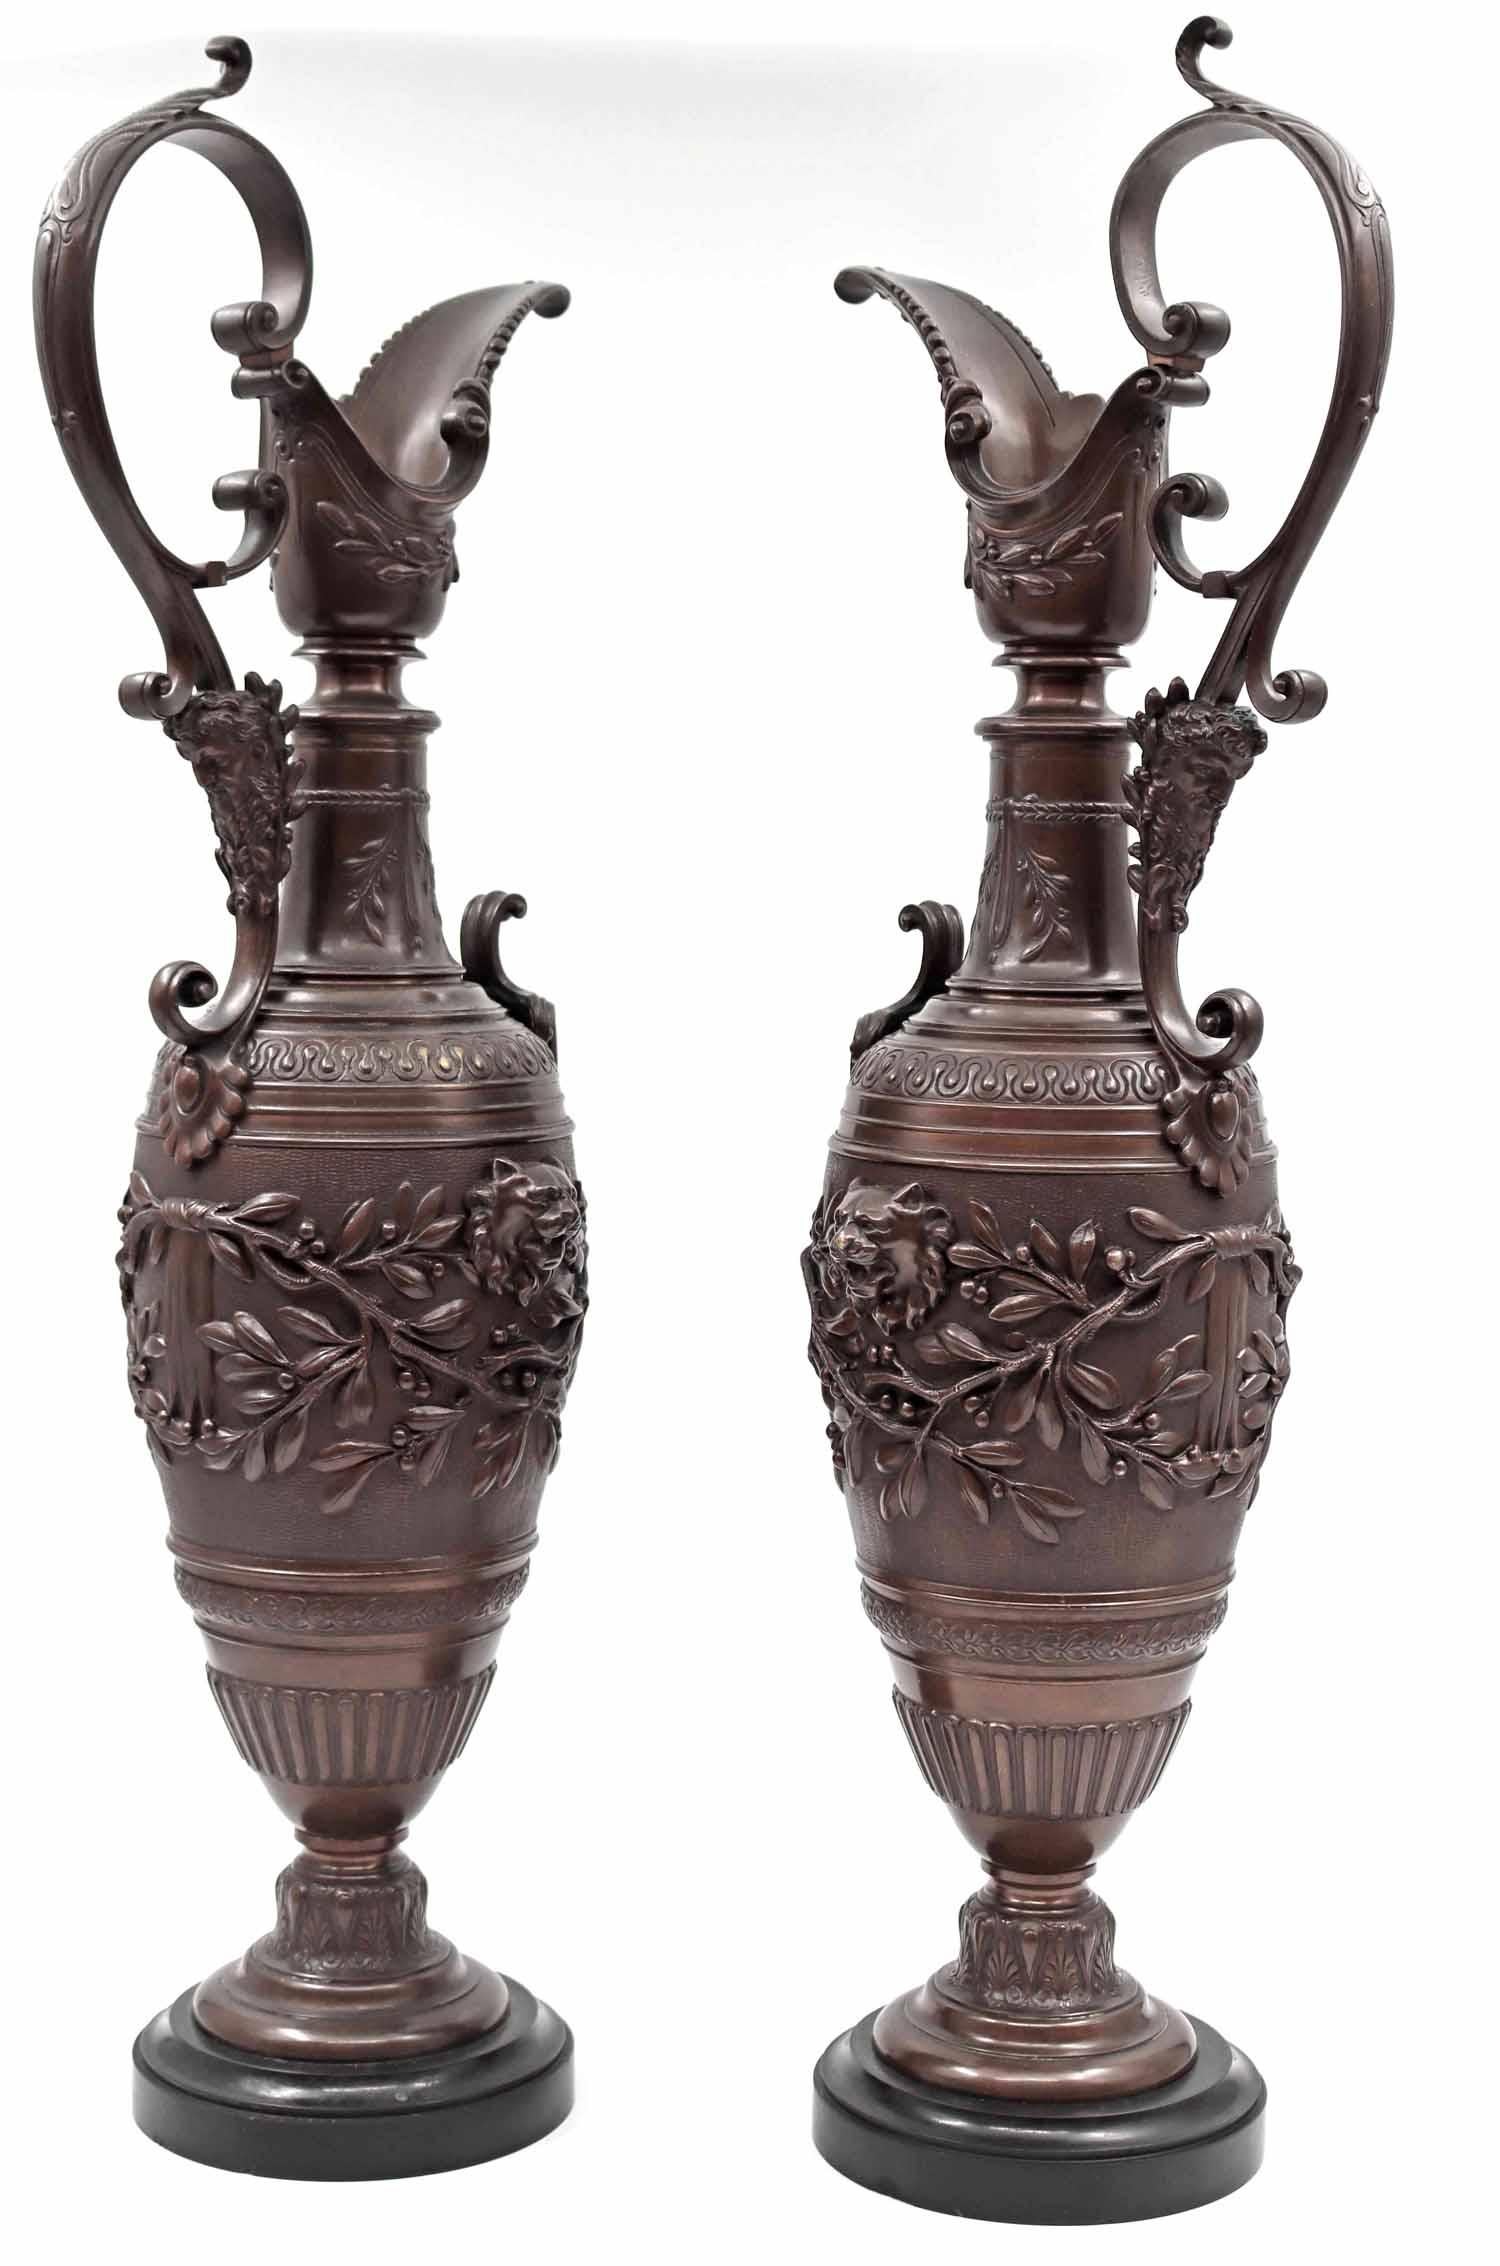 A pair of brown patinated bronze ewers with black marble base, Napoleon III period, 19th century. Great decoration.
Measures: H: 66 cm, W: 24 cm, D: 15 cm.